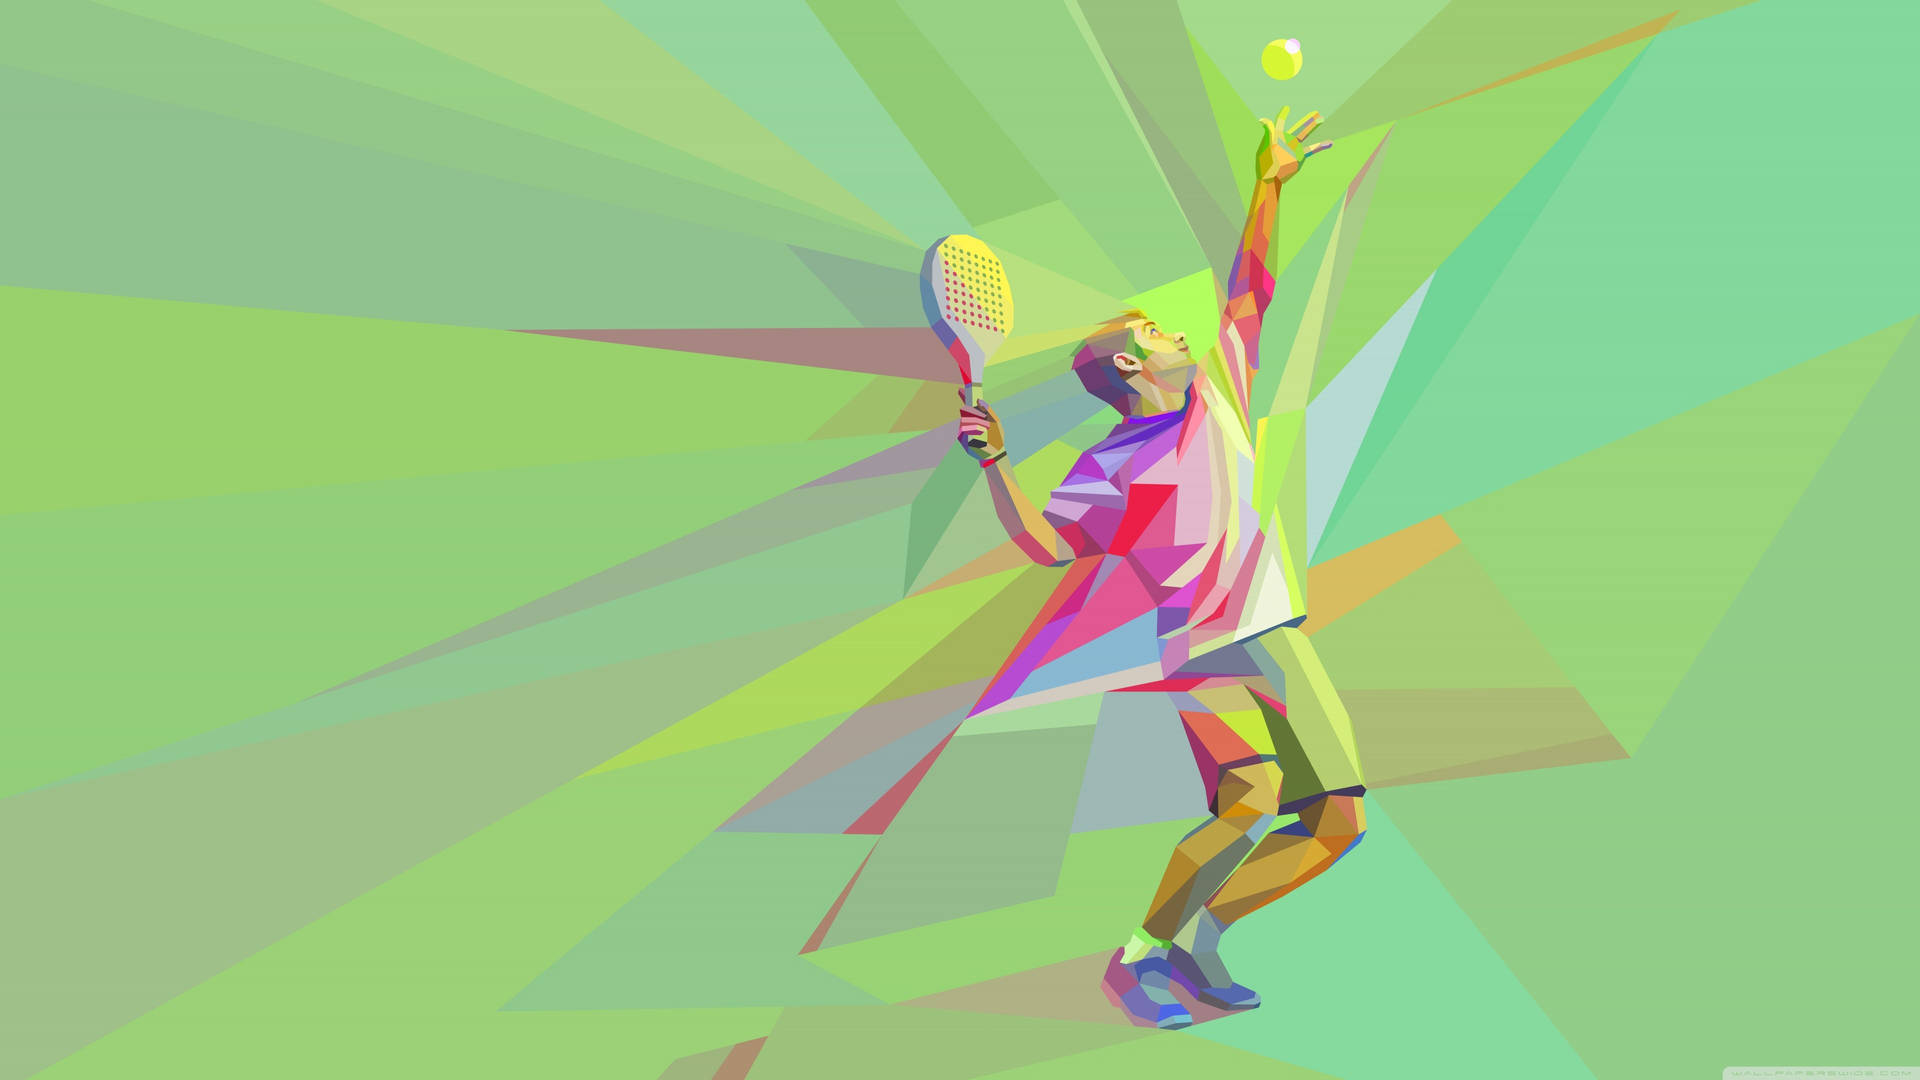 A Dynamic Illustration of a Tennis Player in Action Wallpaper